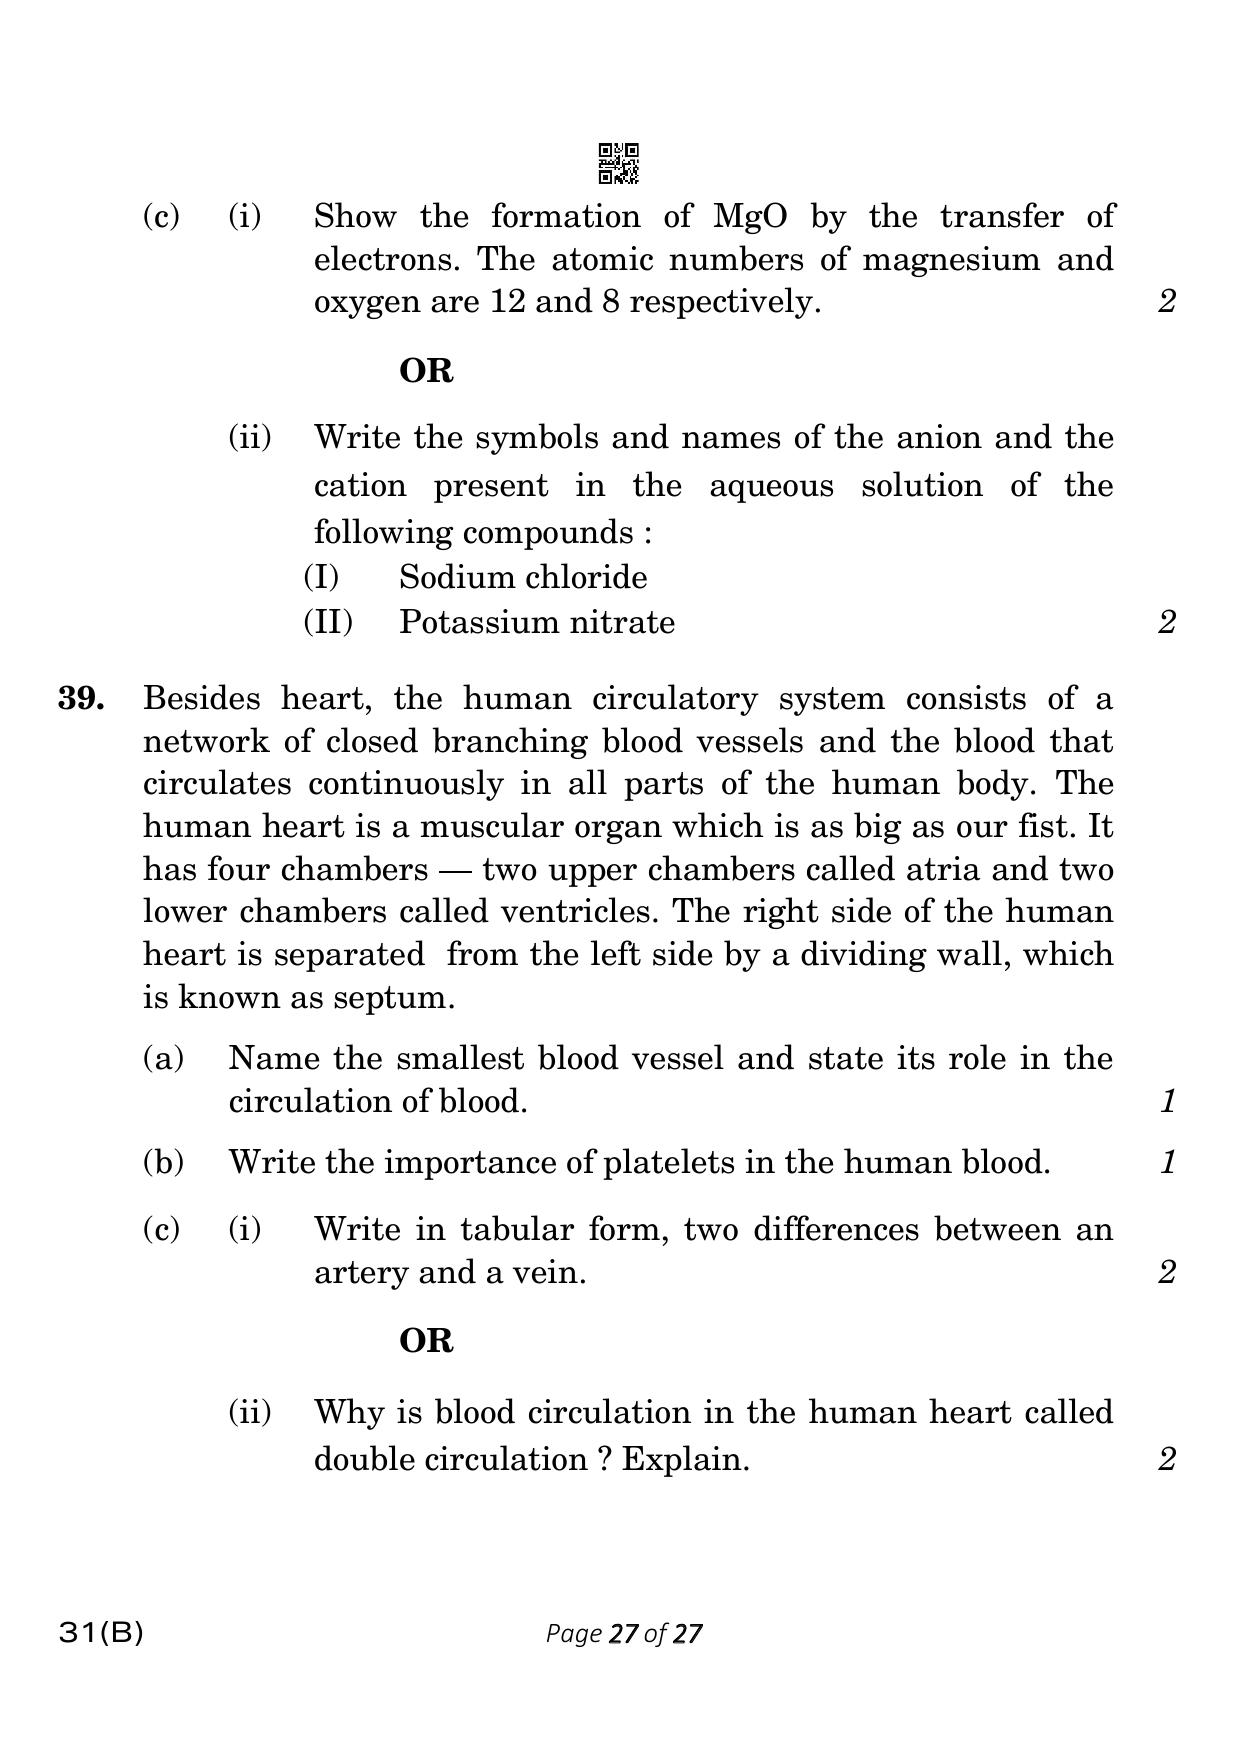 CBSE Class 10 31-B Science 2023 (Compartment) Question Paper - Page 27